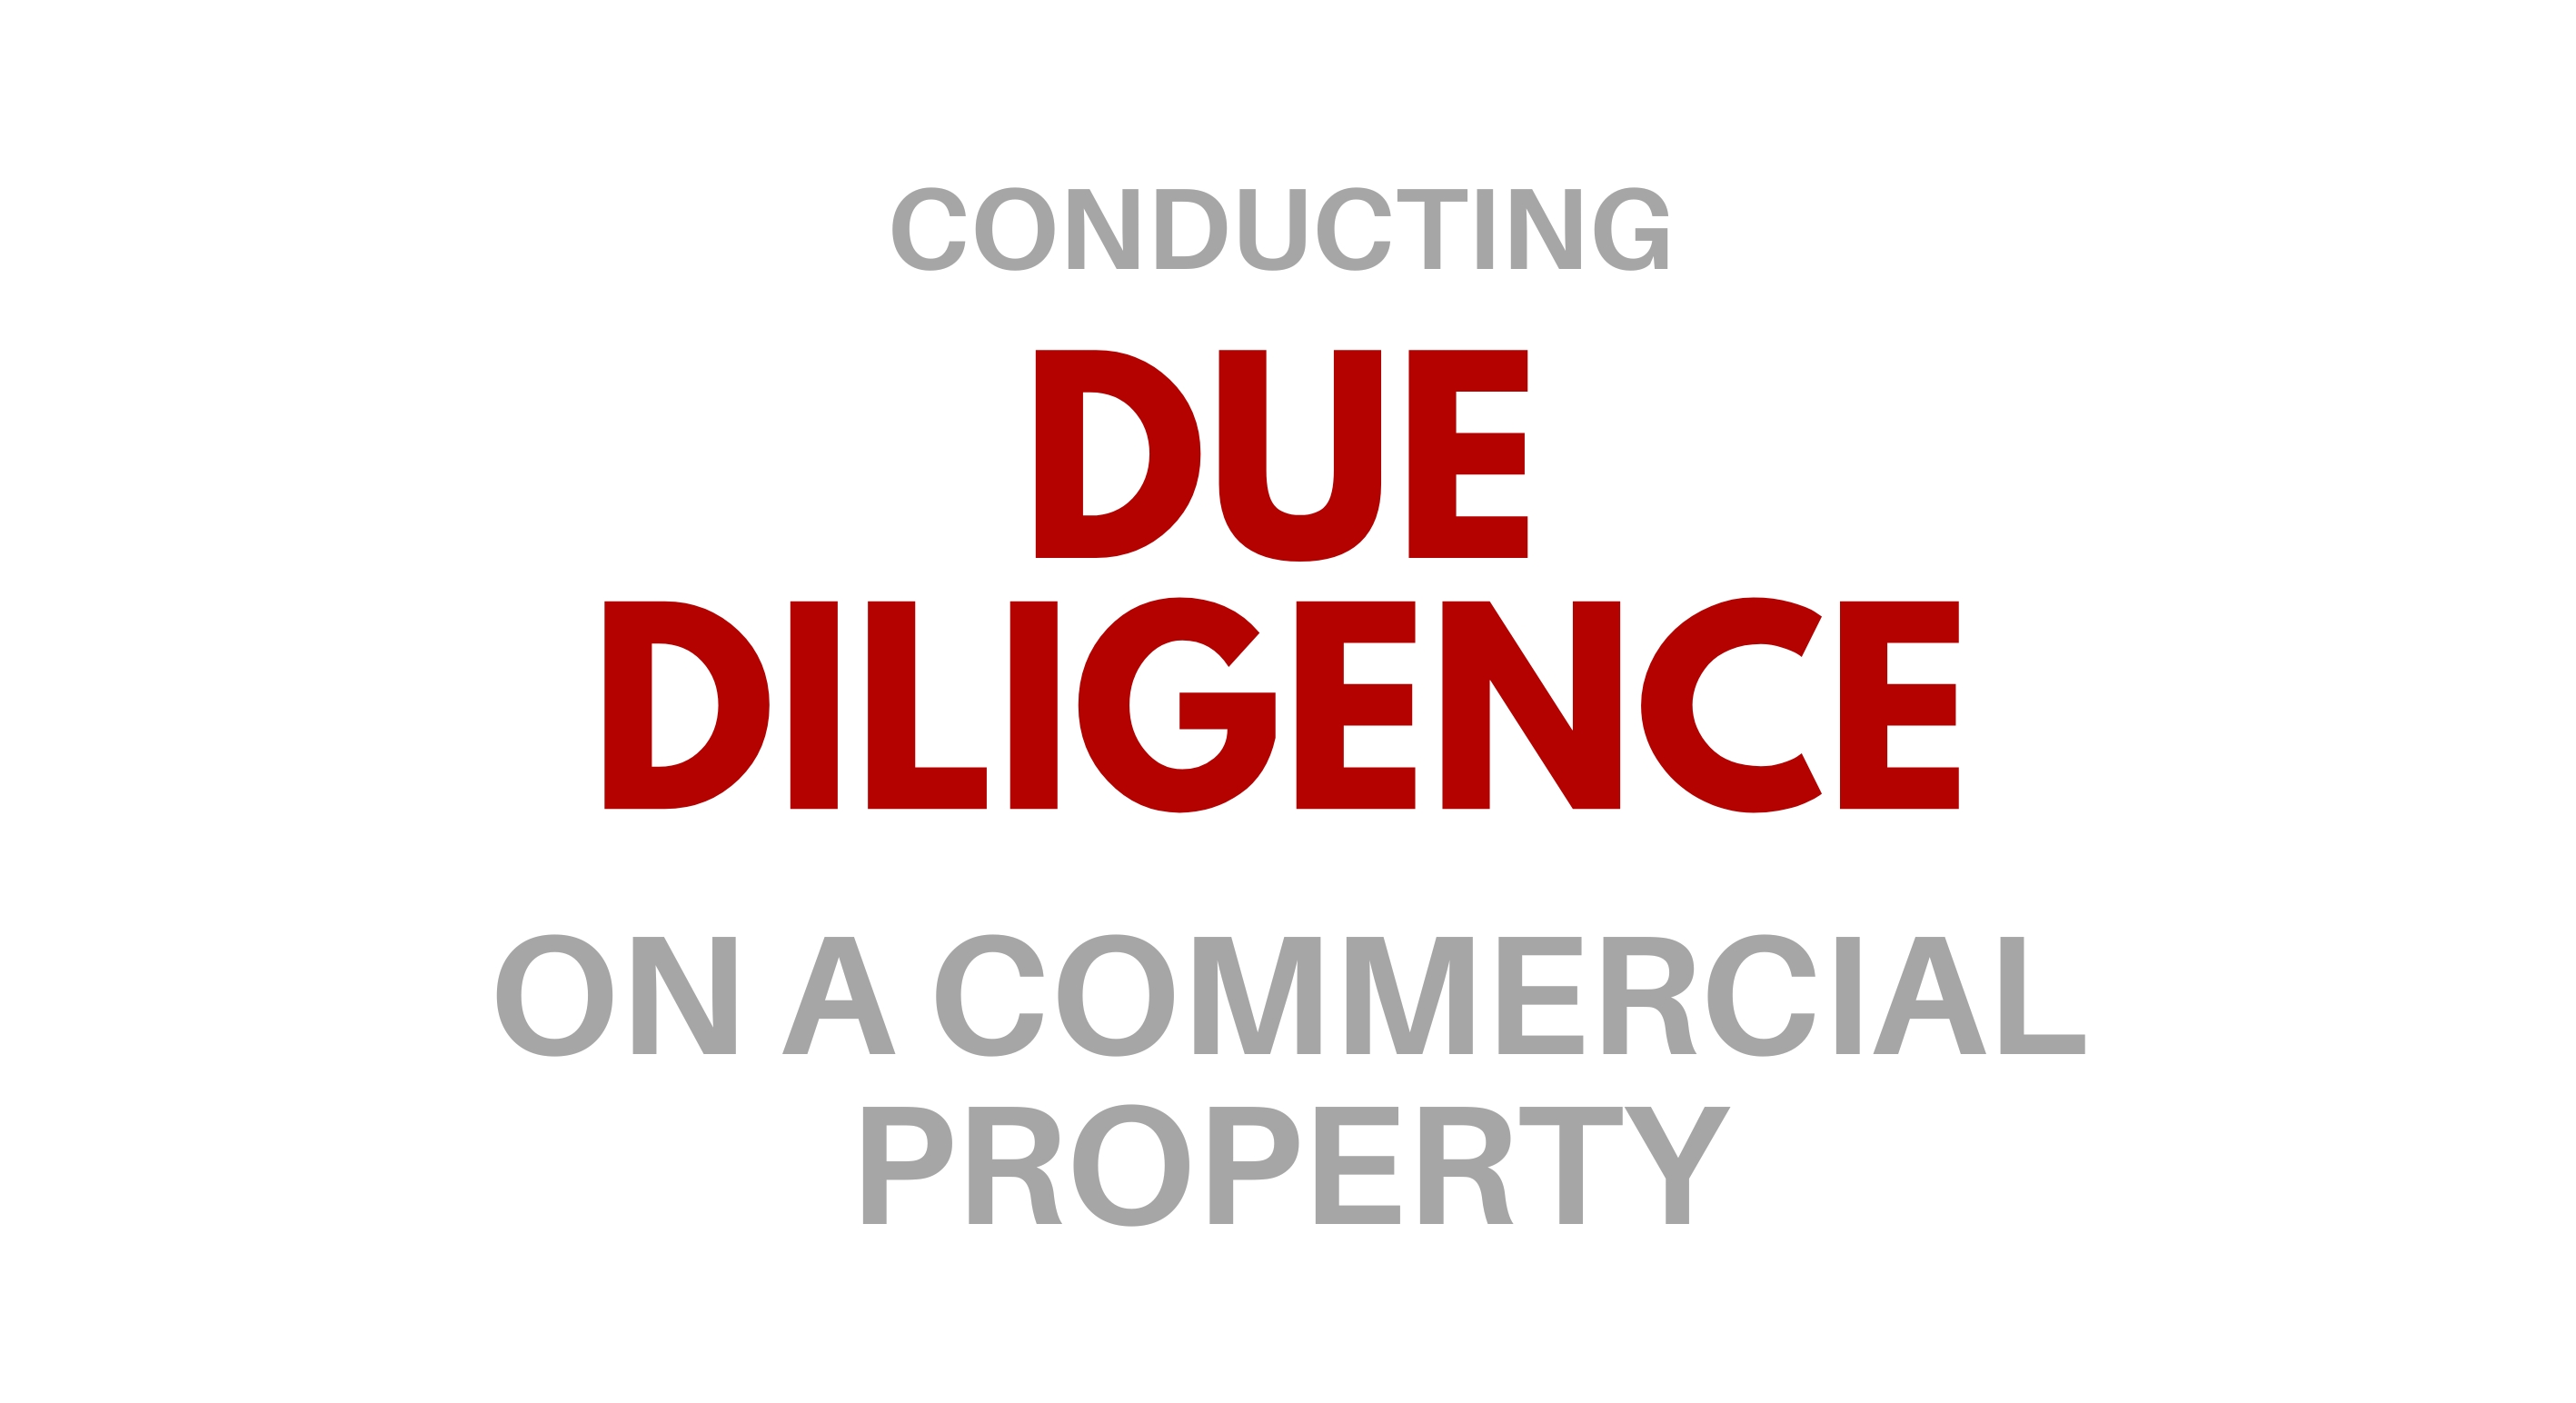 Conducting due diligence on a commercial property